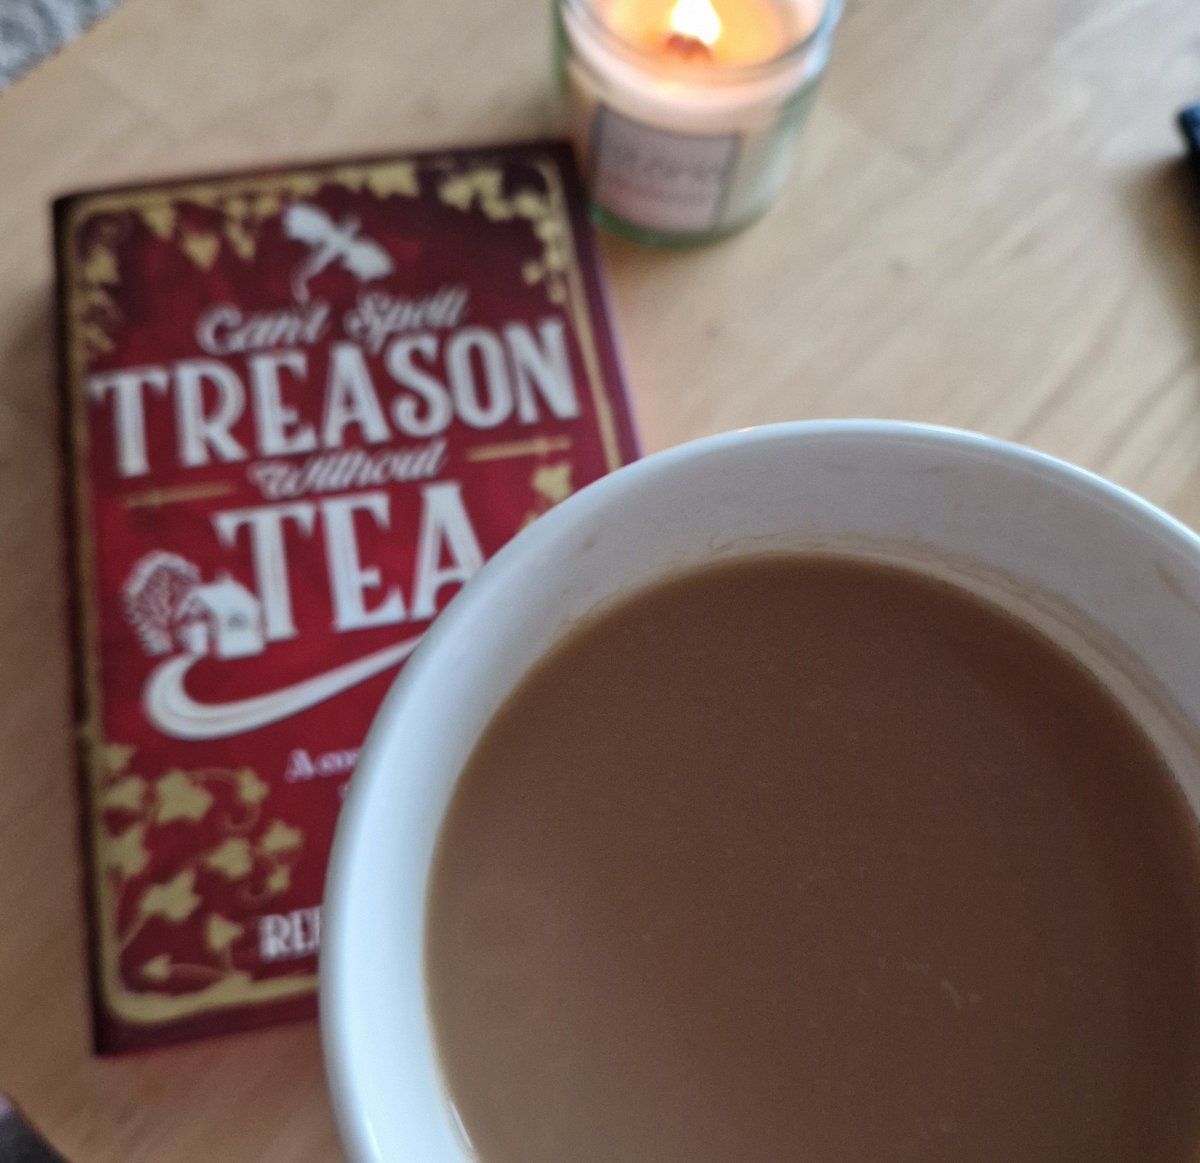 Second book of the weekend. This one has a vastly different tine to the last.

Have you read Can't Spell Treason Without Tea?

Did you manage to get to your weekend reading?

#sundayreading #booktwitter #currentlyreading